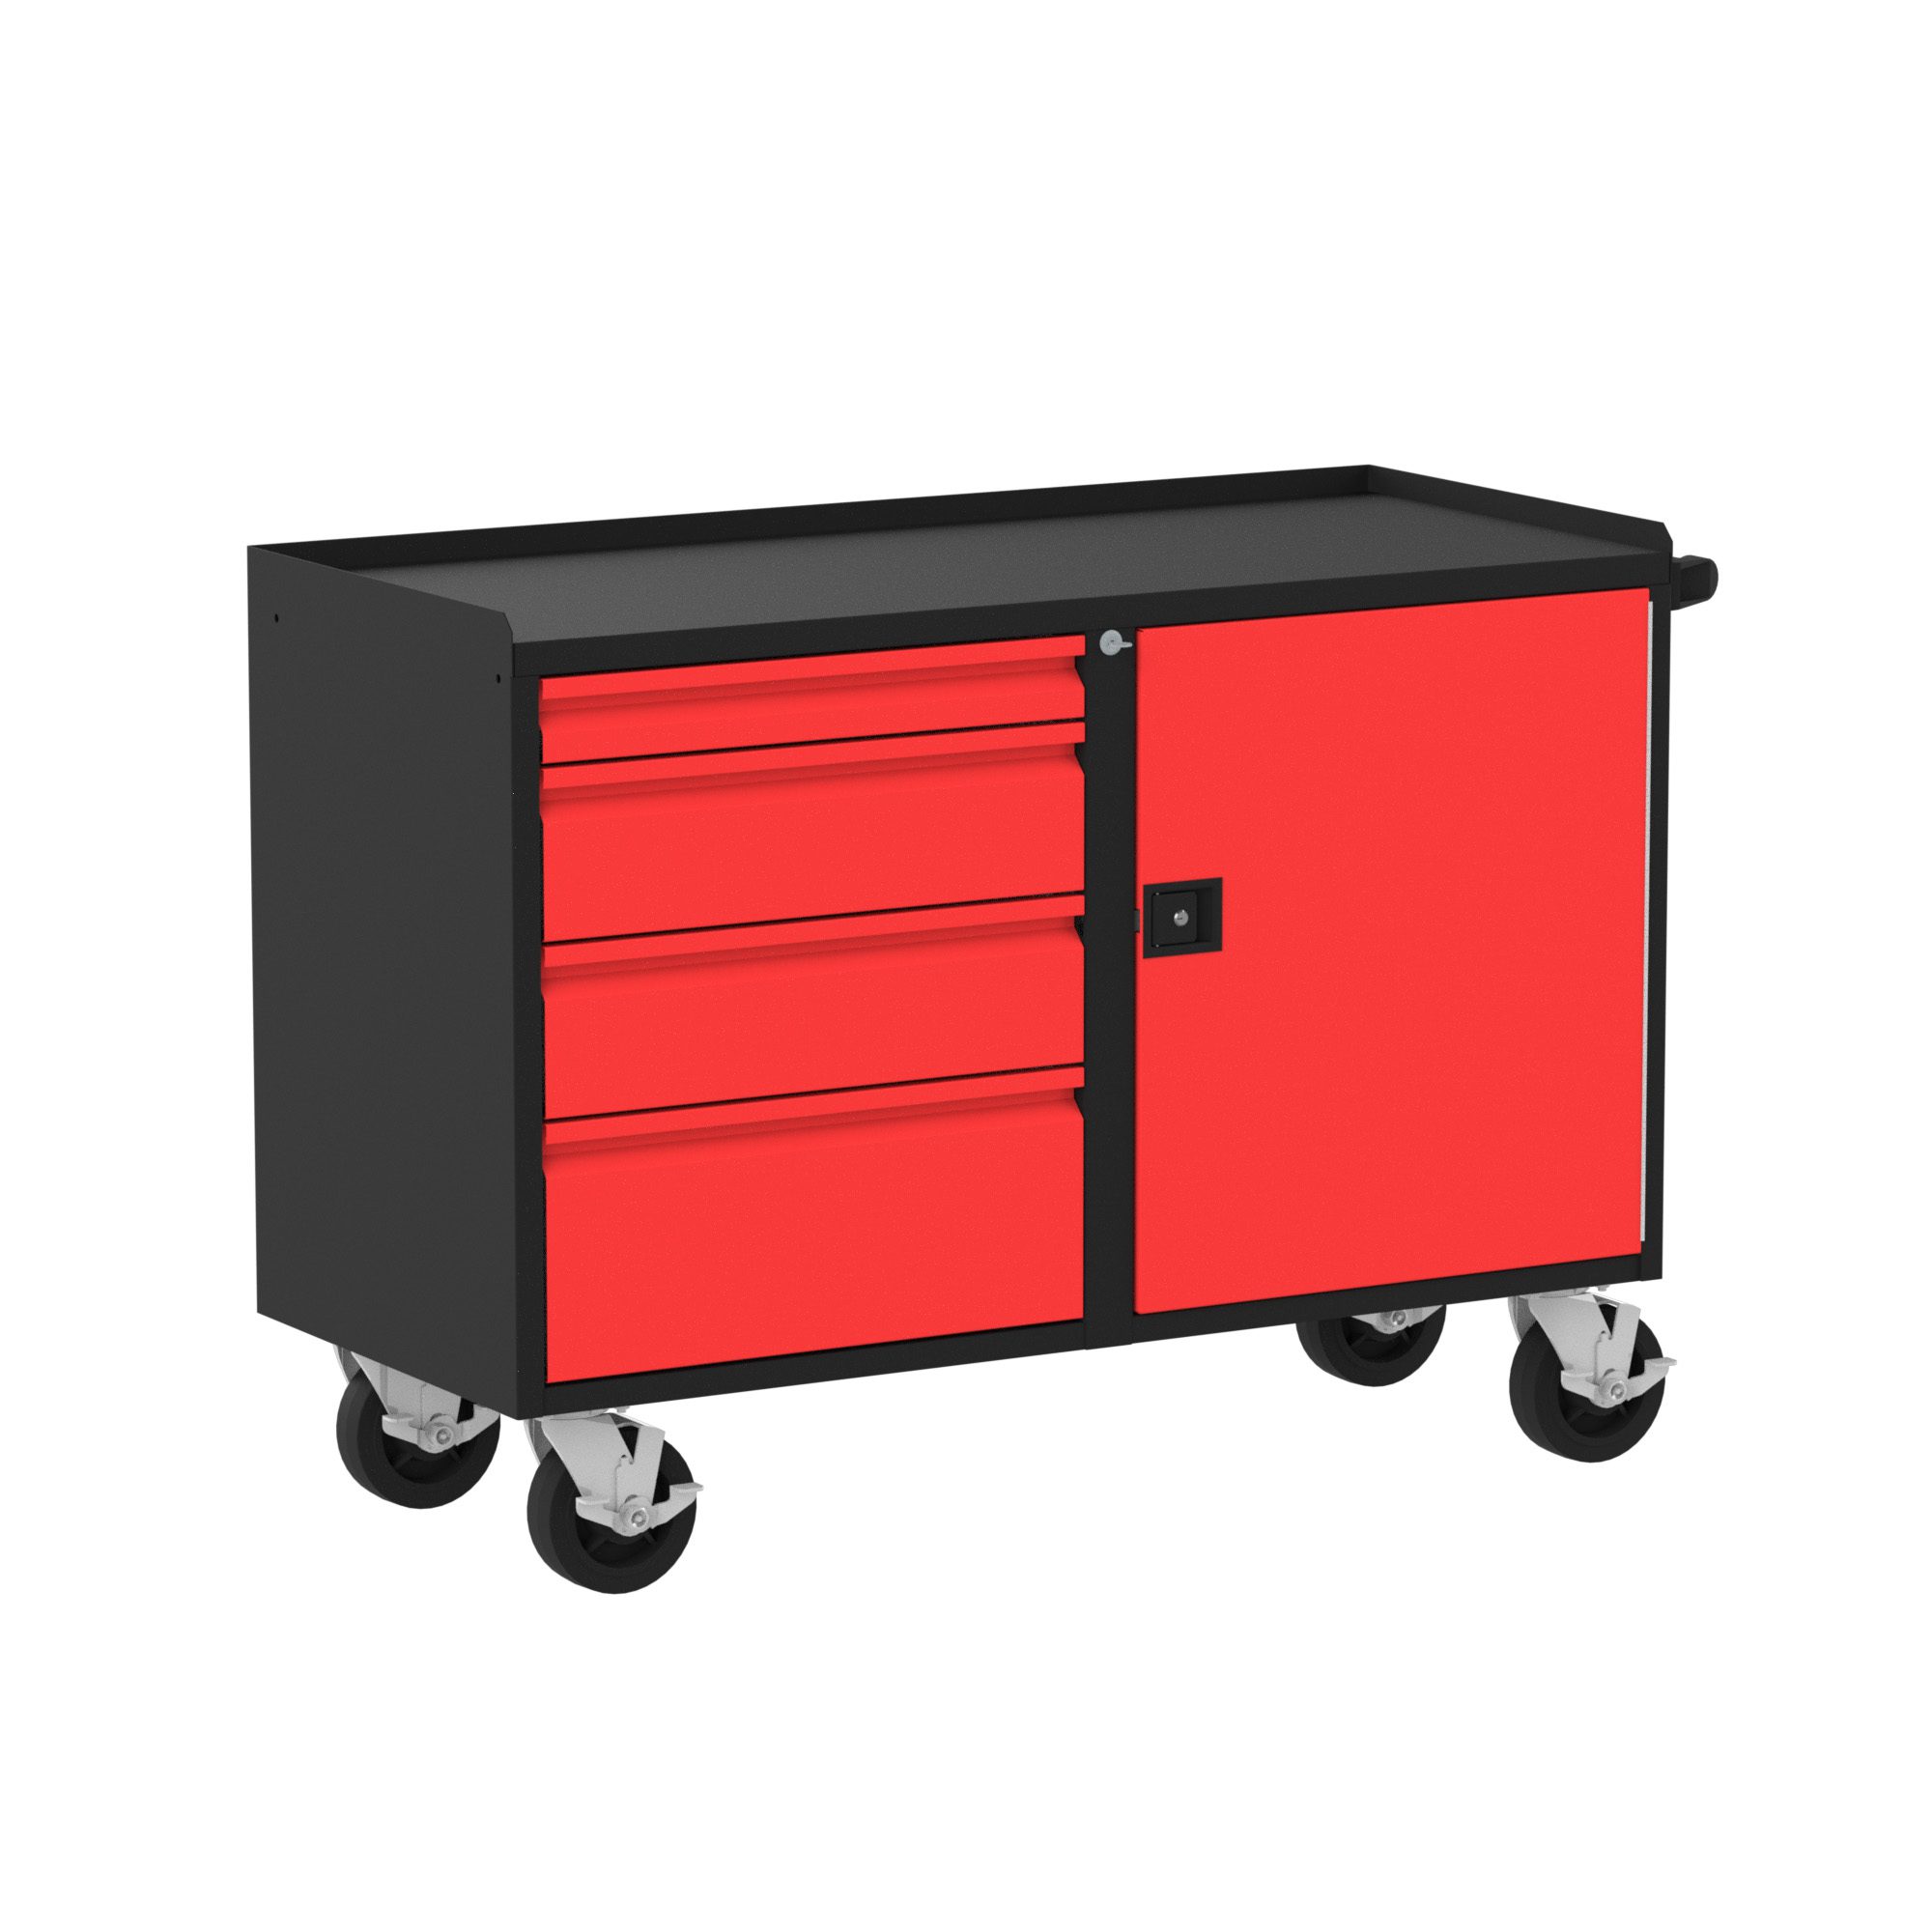 Valley Craft Mobile Workbench, 48"W Deluxe - (4) Drawers (1) Door, 48"W x 21"D x 36"H, 2000 lb. Capacity, Red/Black